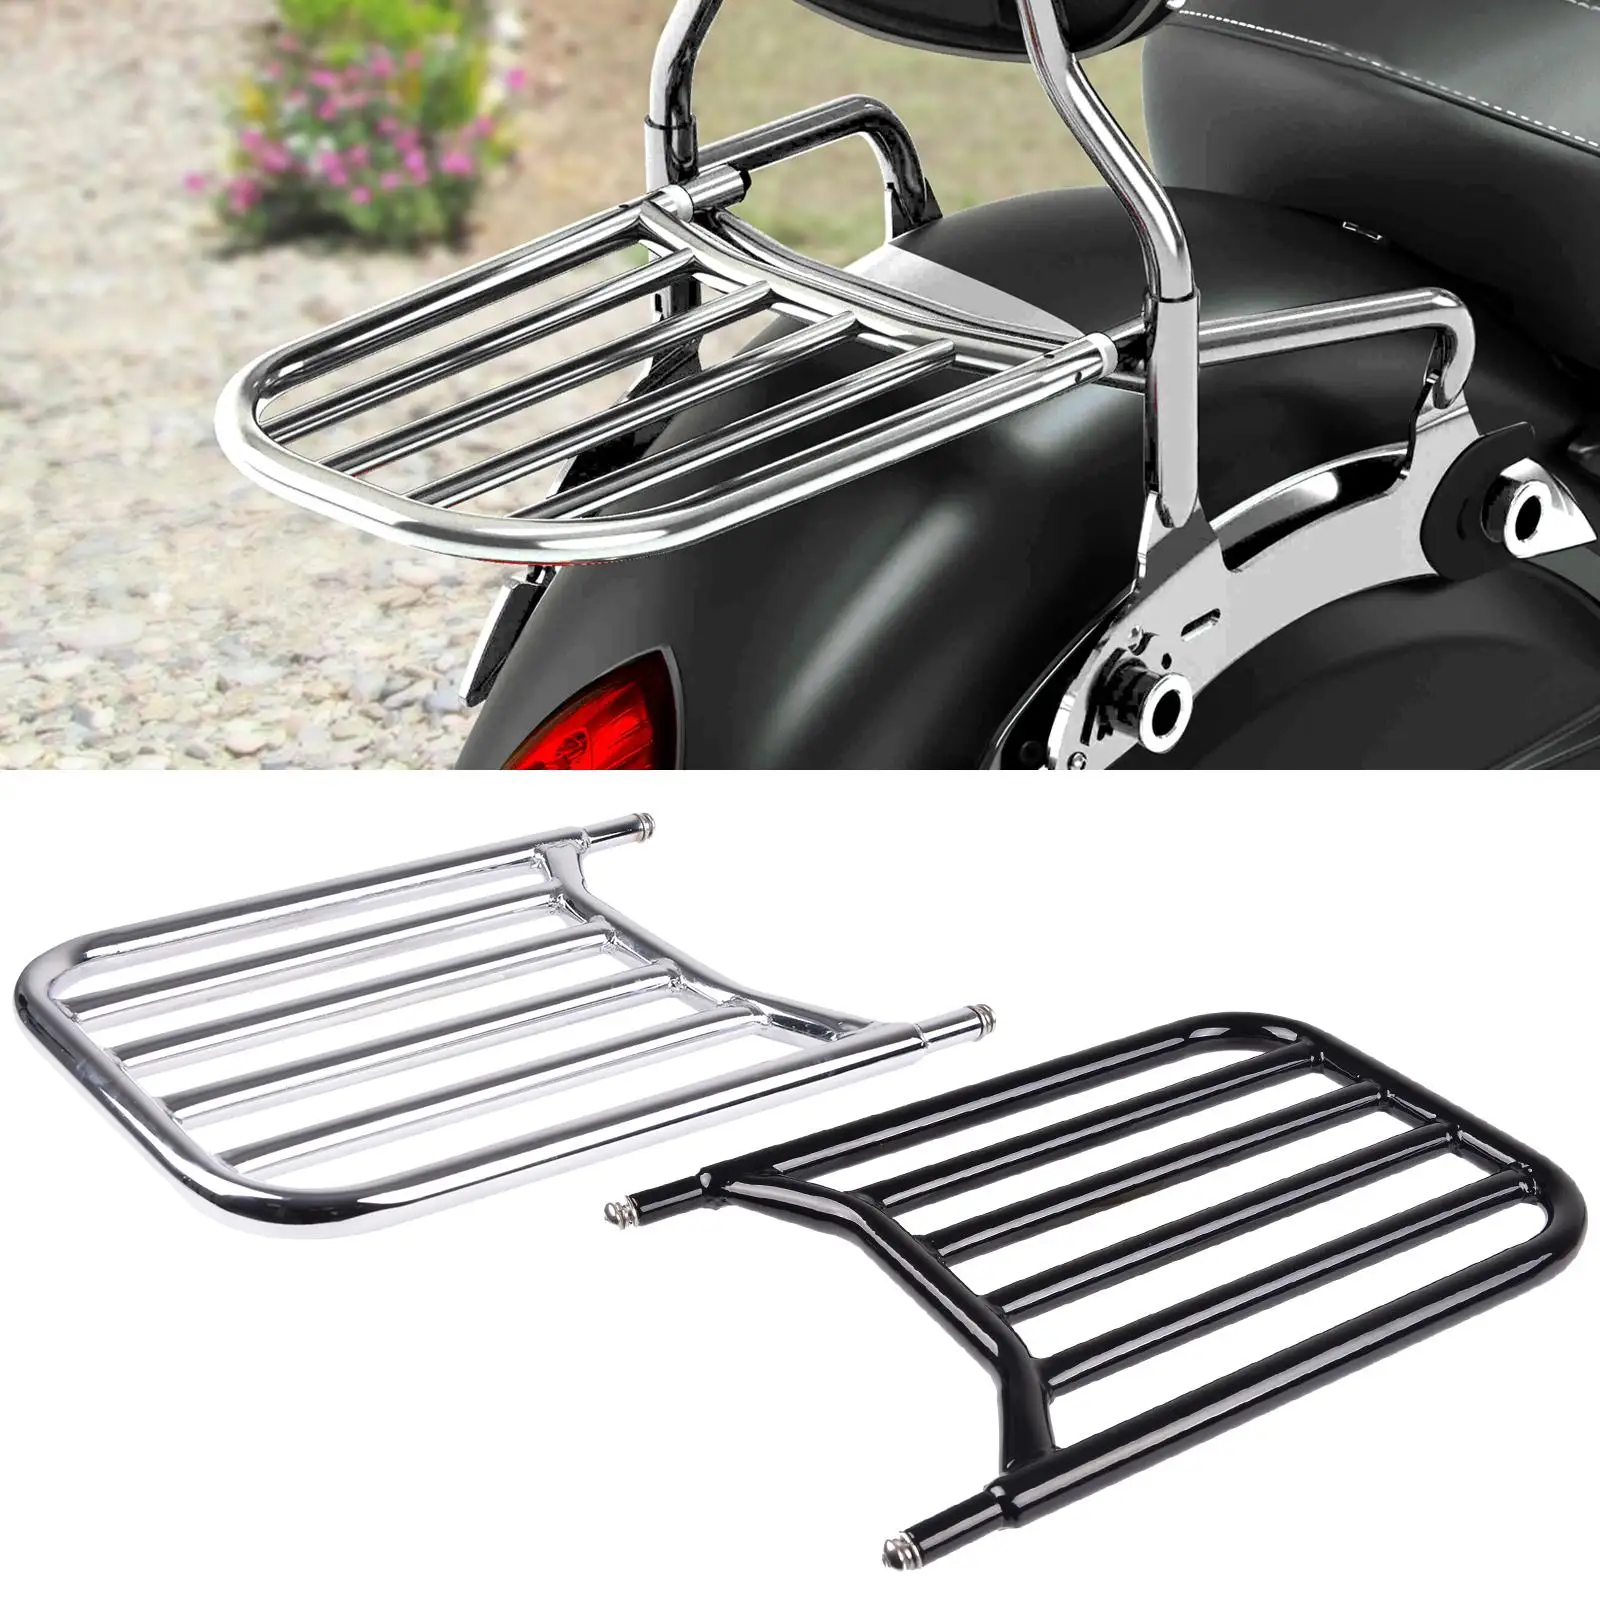 Rear Backrest Sissy Bar Fit for Indian Chieftain Dark Horse Challenger